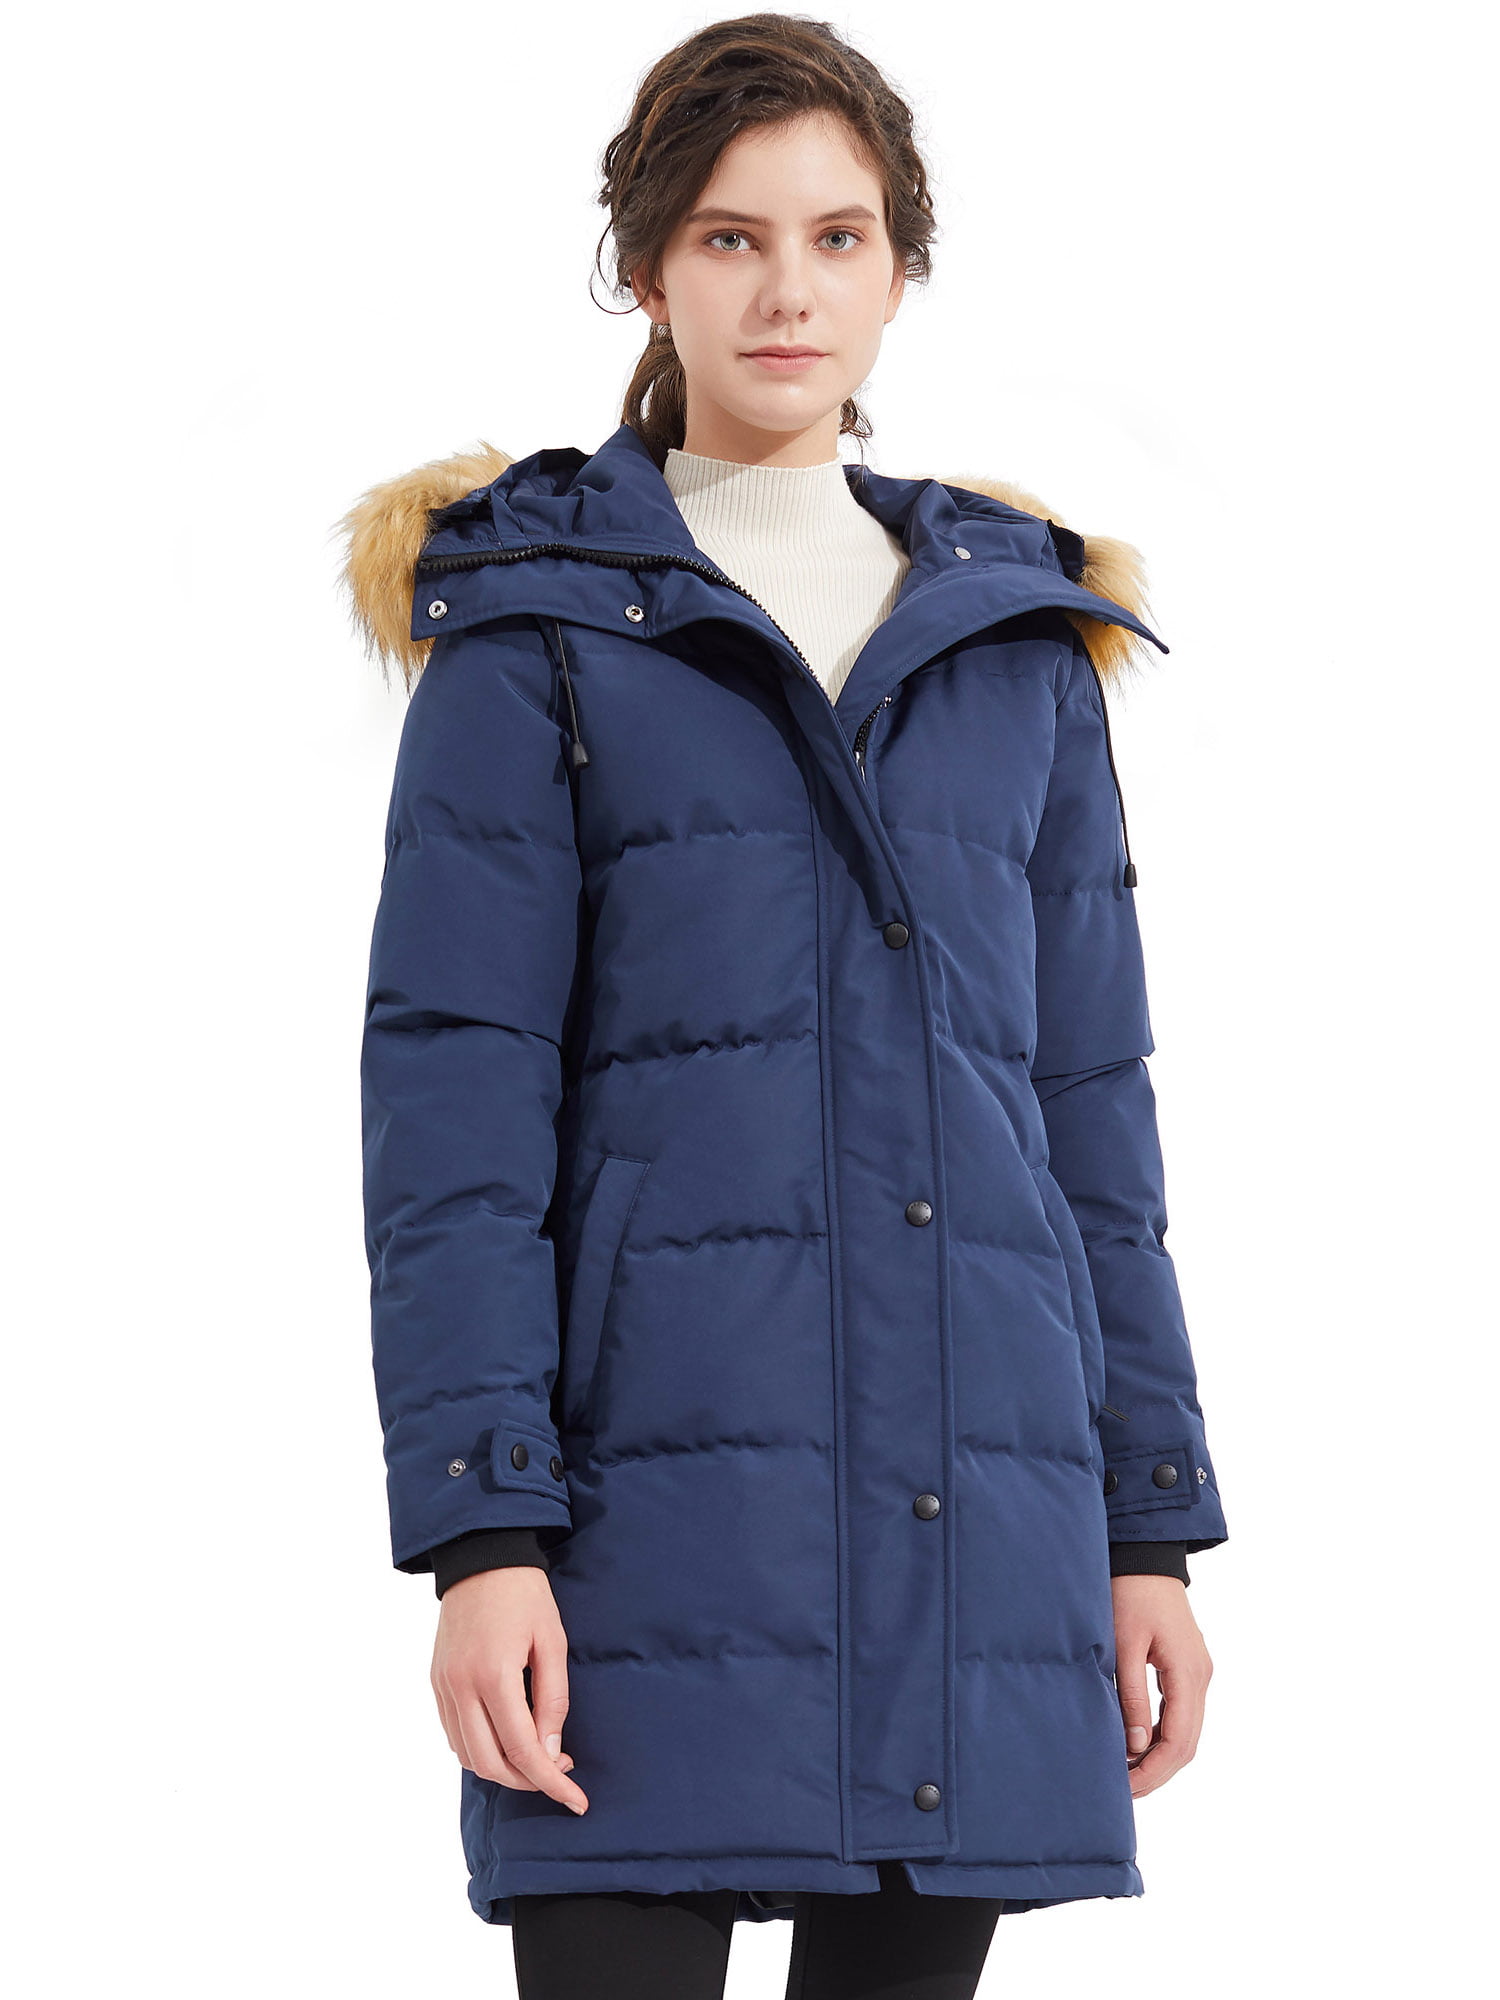 Winter Warm Orolay Style Women thicken Padded Coat Hooded Jacket Parka Outwear 